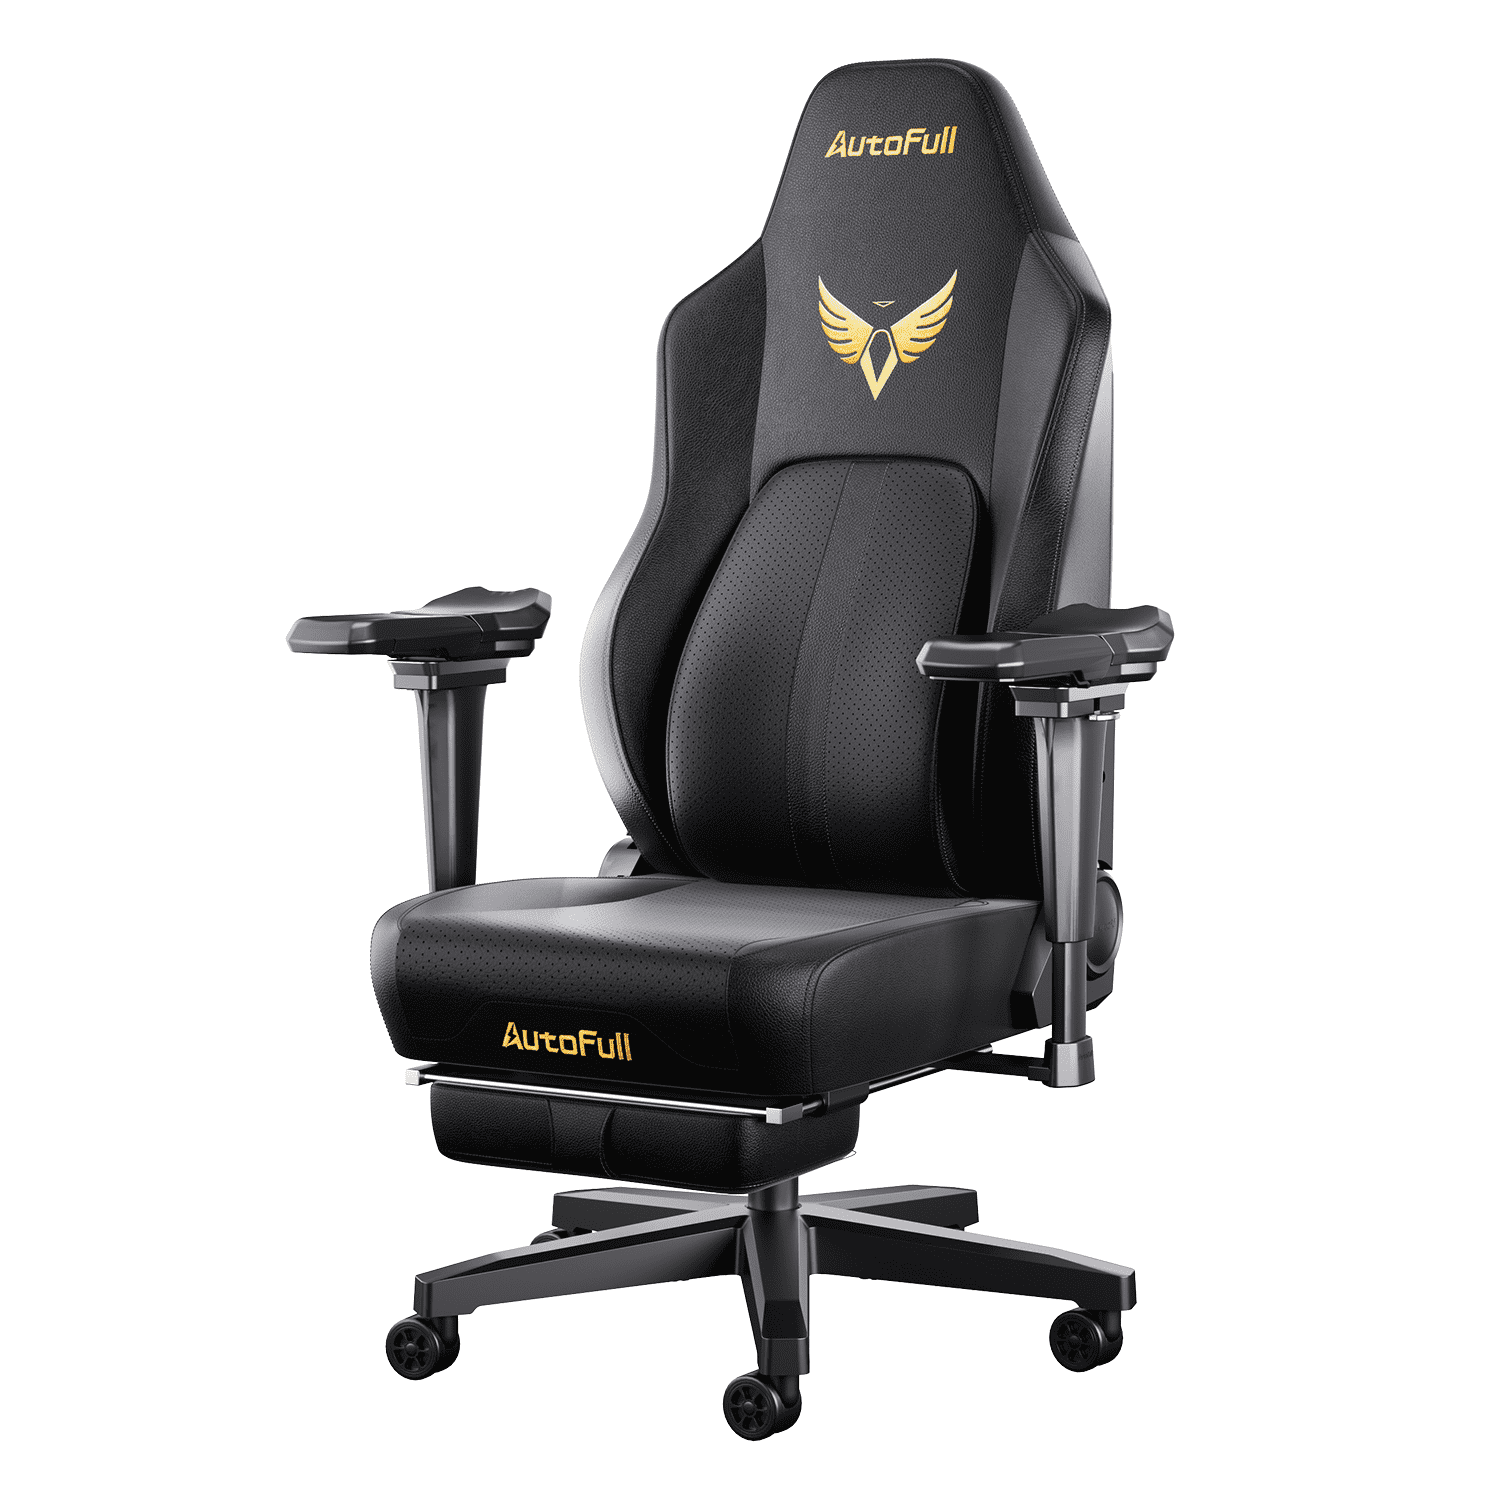 AutoFull M6 Gaming Chair, Premium, 6D Foldable Mechanical Armrests, with Footrest